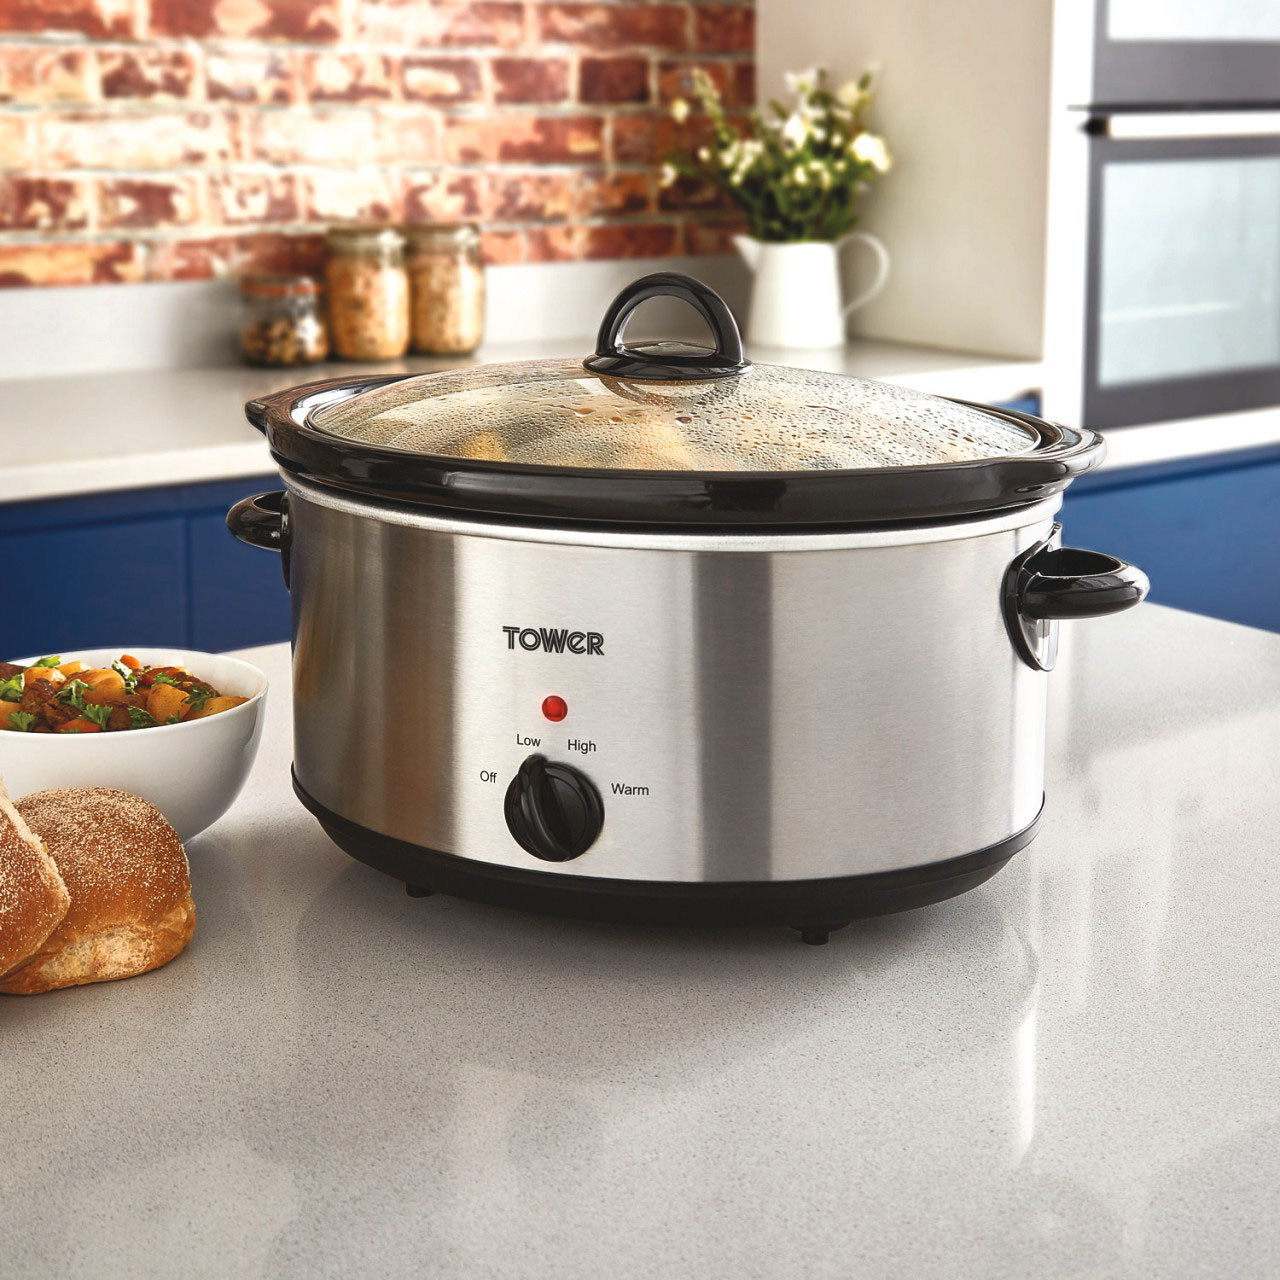 Tower Stainless Steel Slow Cooker